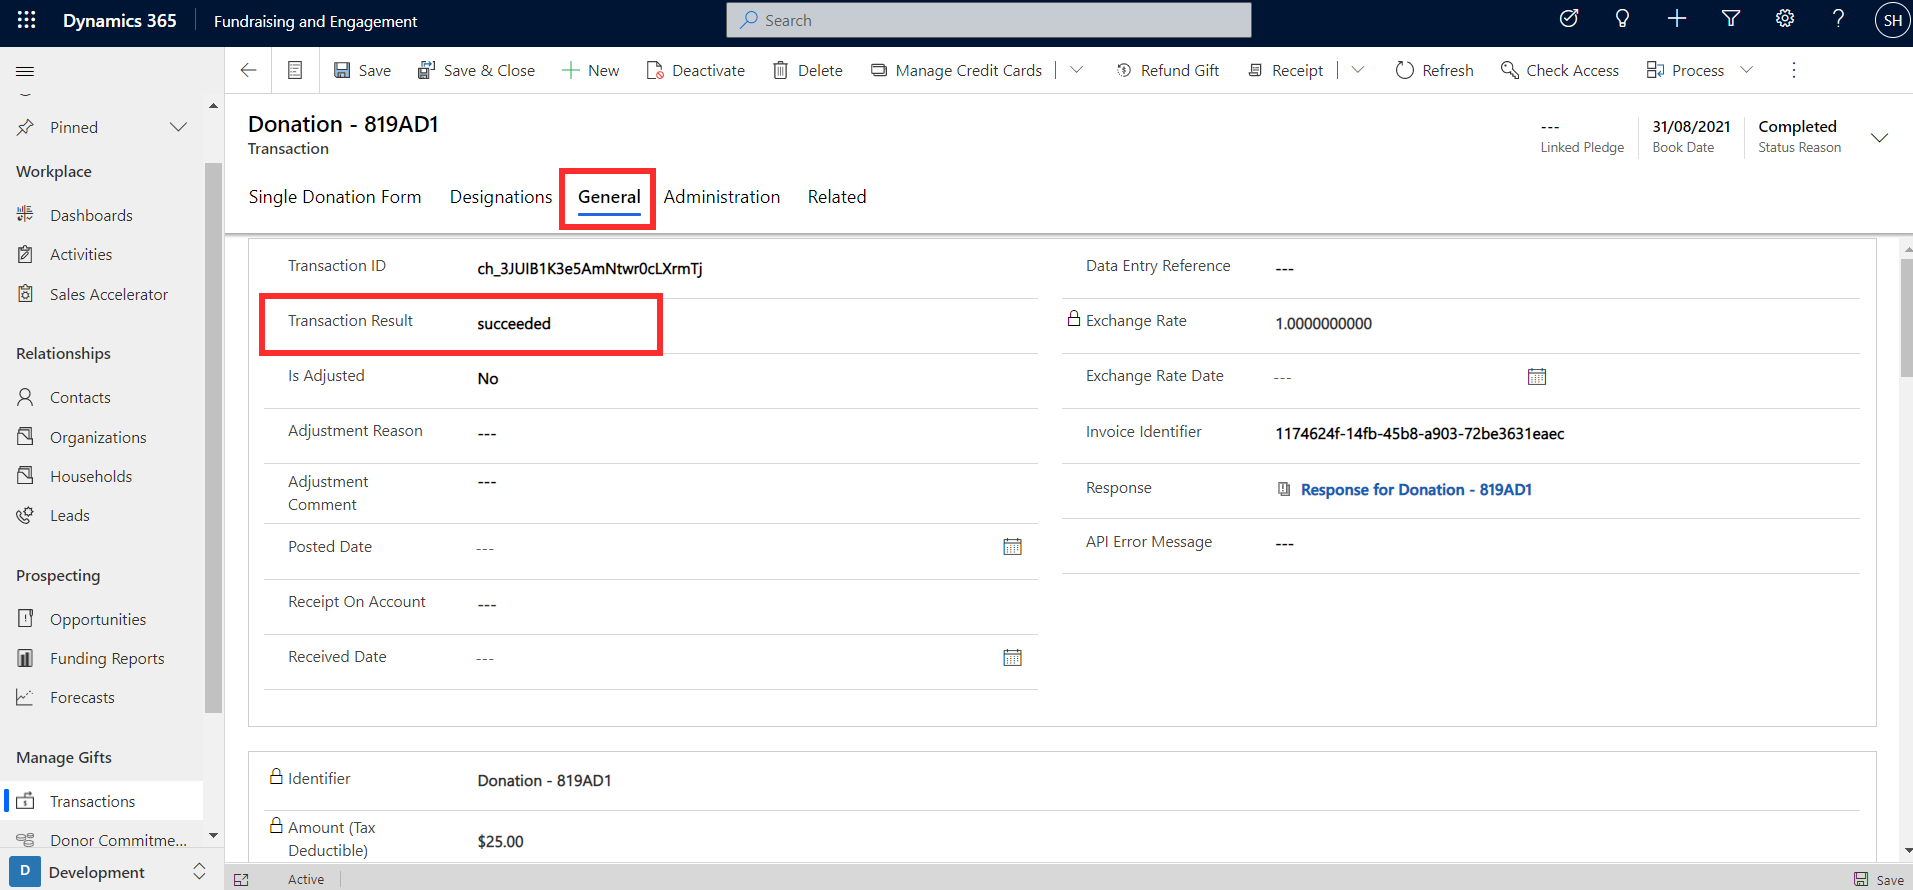 Screenshot of Dynamics 365 Fundraising and Engagement showing transaction result succeeded.